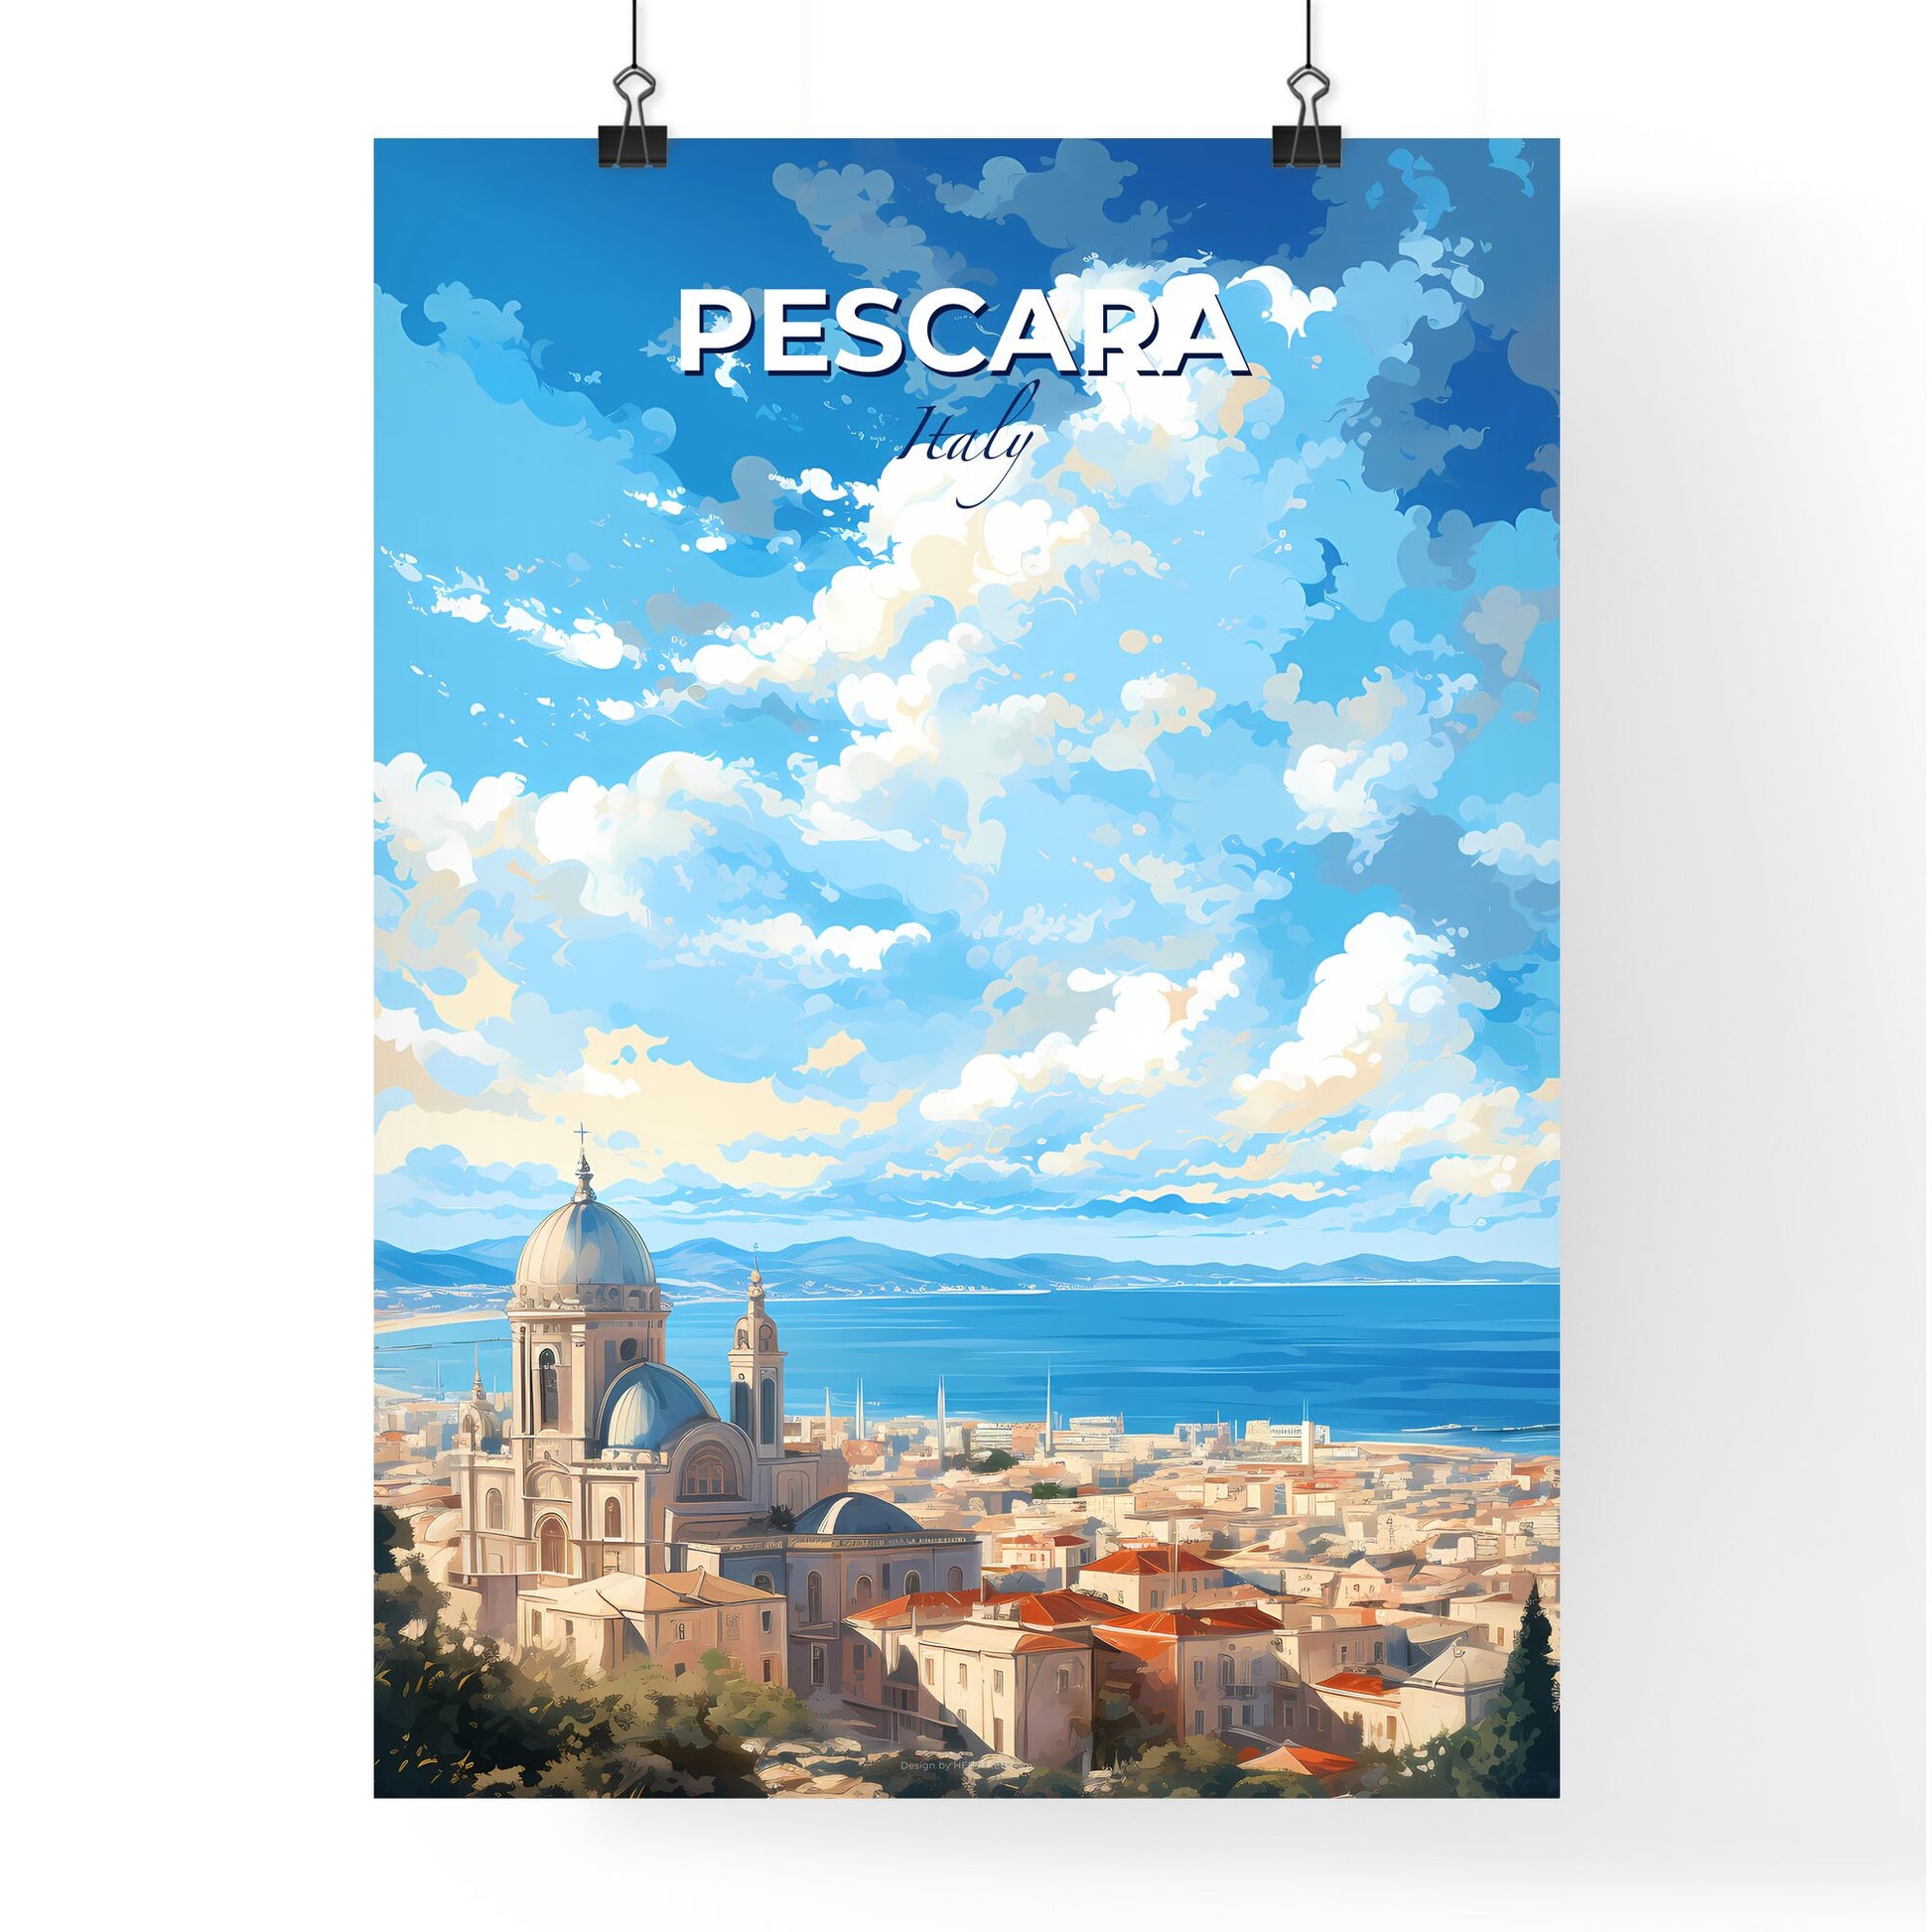 Pescara Italy Skyline - A Large Building With A Dome And A Body Of Water - Customizable Travel Gift Default Title